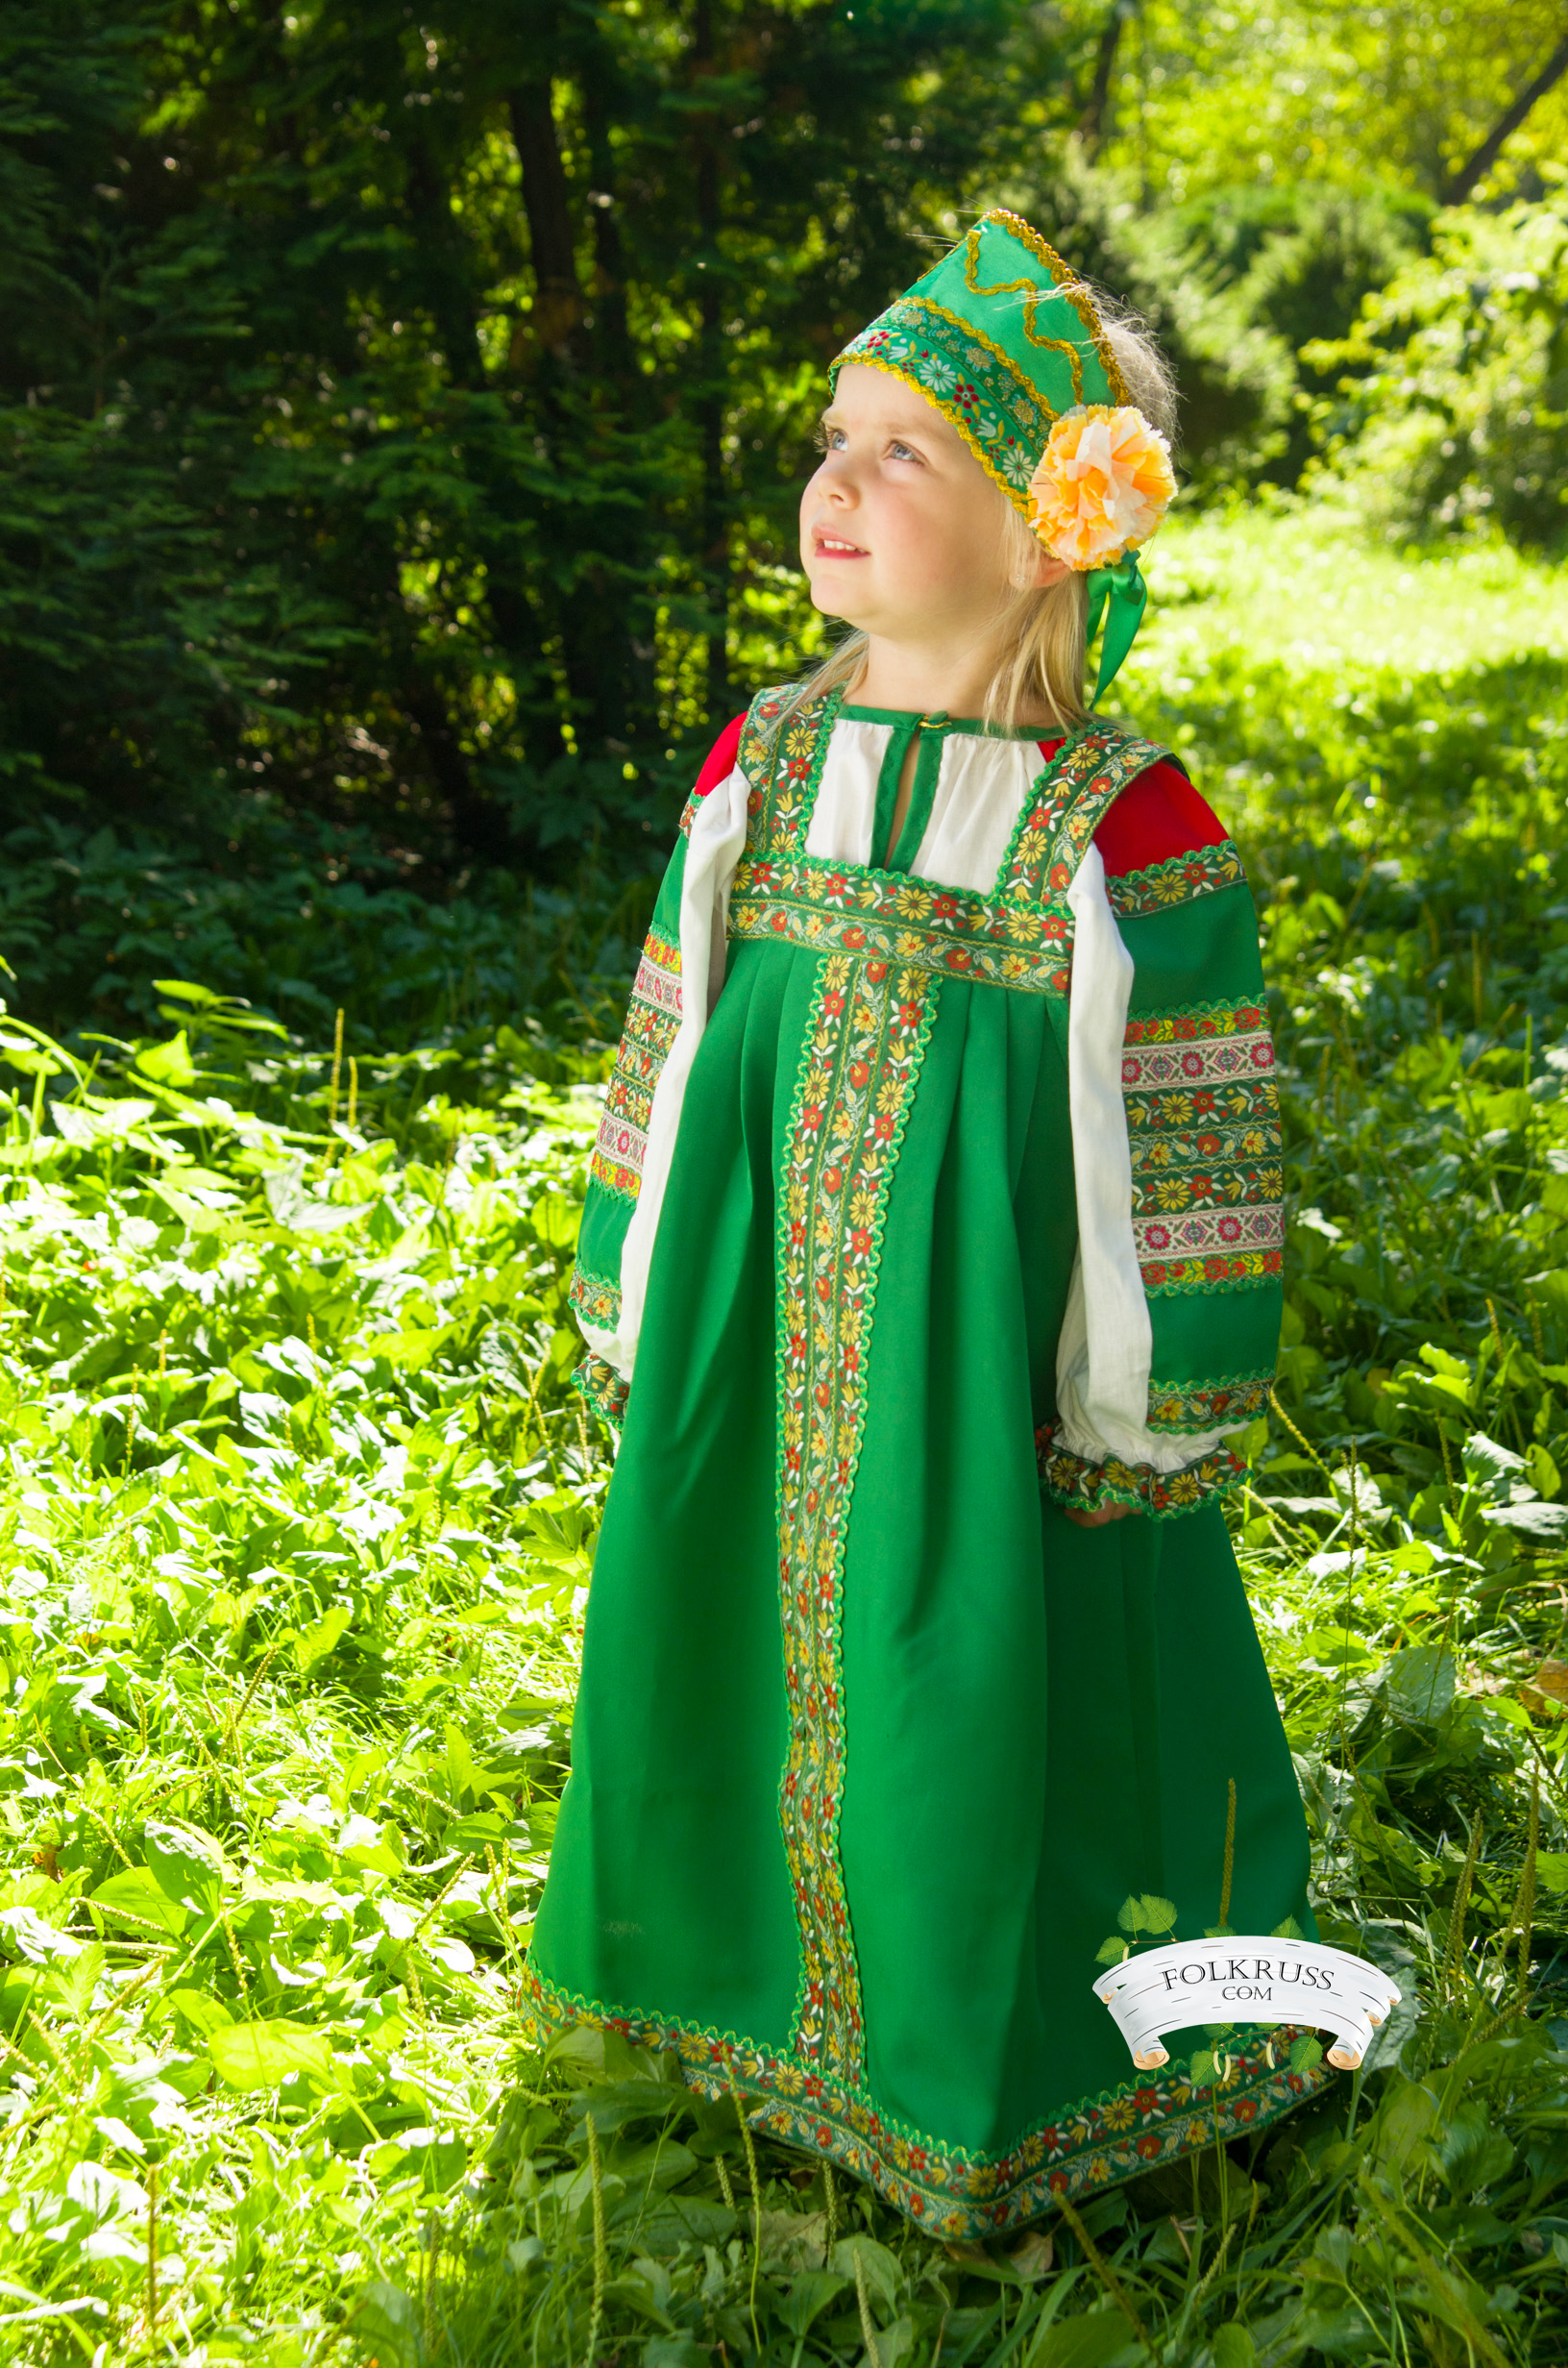 File:Fort Ross Woman wearing Traditional Russian Costume c 